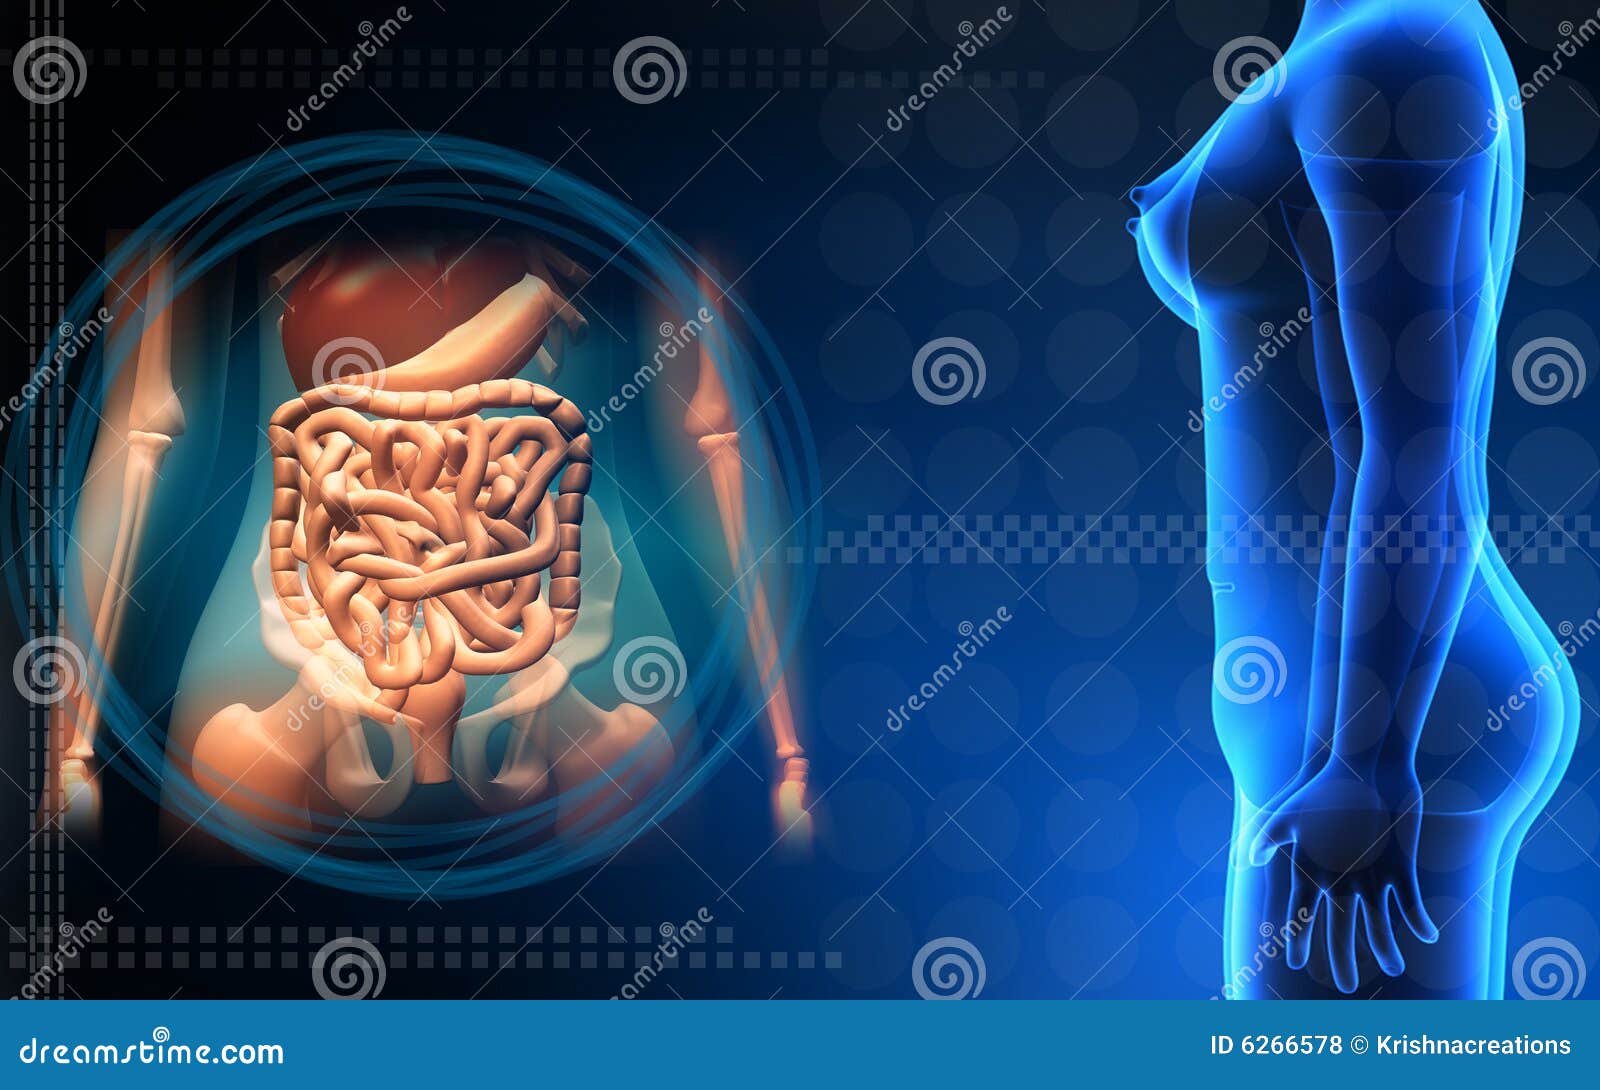 Female Human Body And Digestive System Royalty Free Stock Photos - Image: 6266578